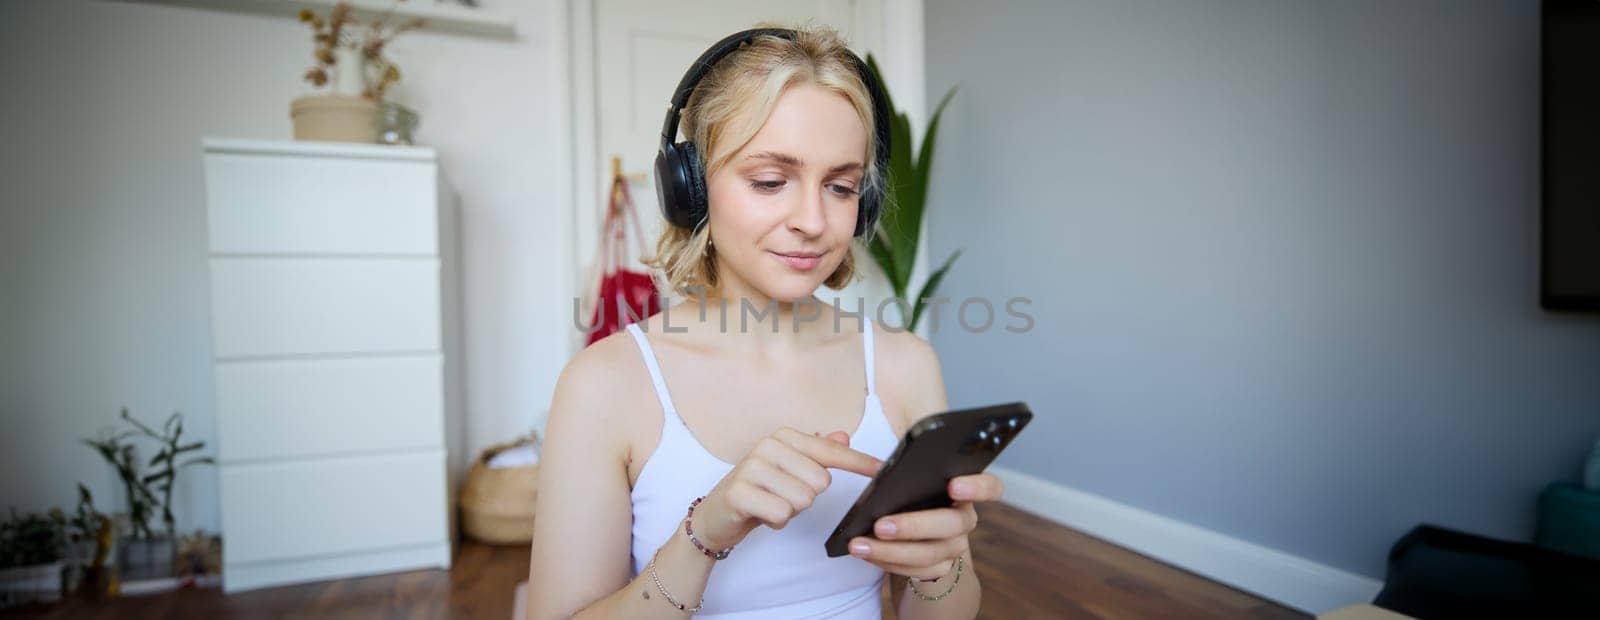 Portrait of young blond woman in headphones, turning on yoga, workout app on smartphone, choosing music on mobile phone application, sitting on rubber mat in room.